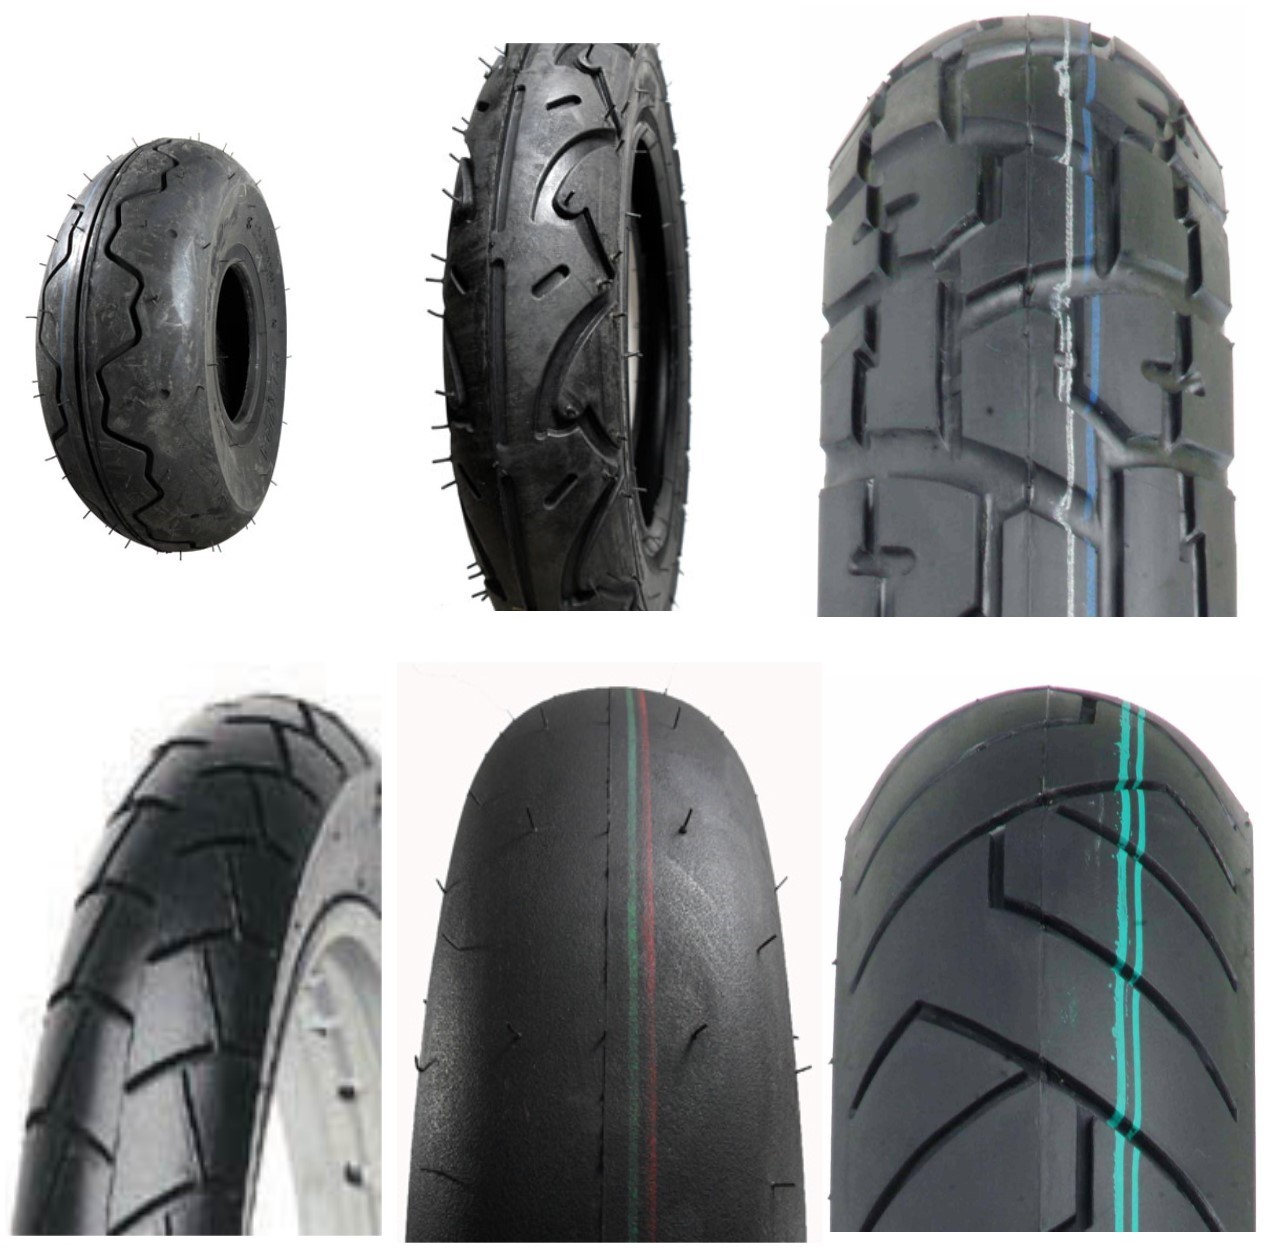 Scooter-Moped Tires